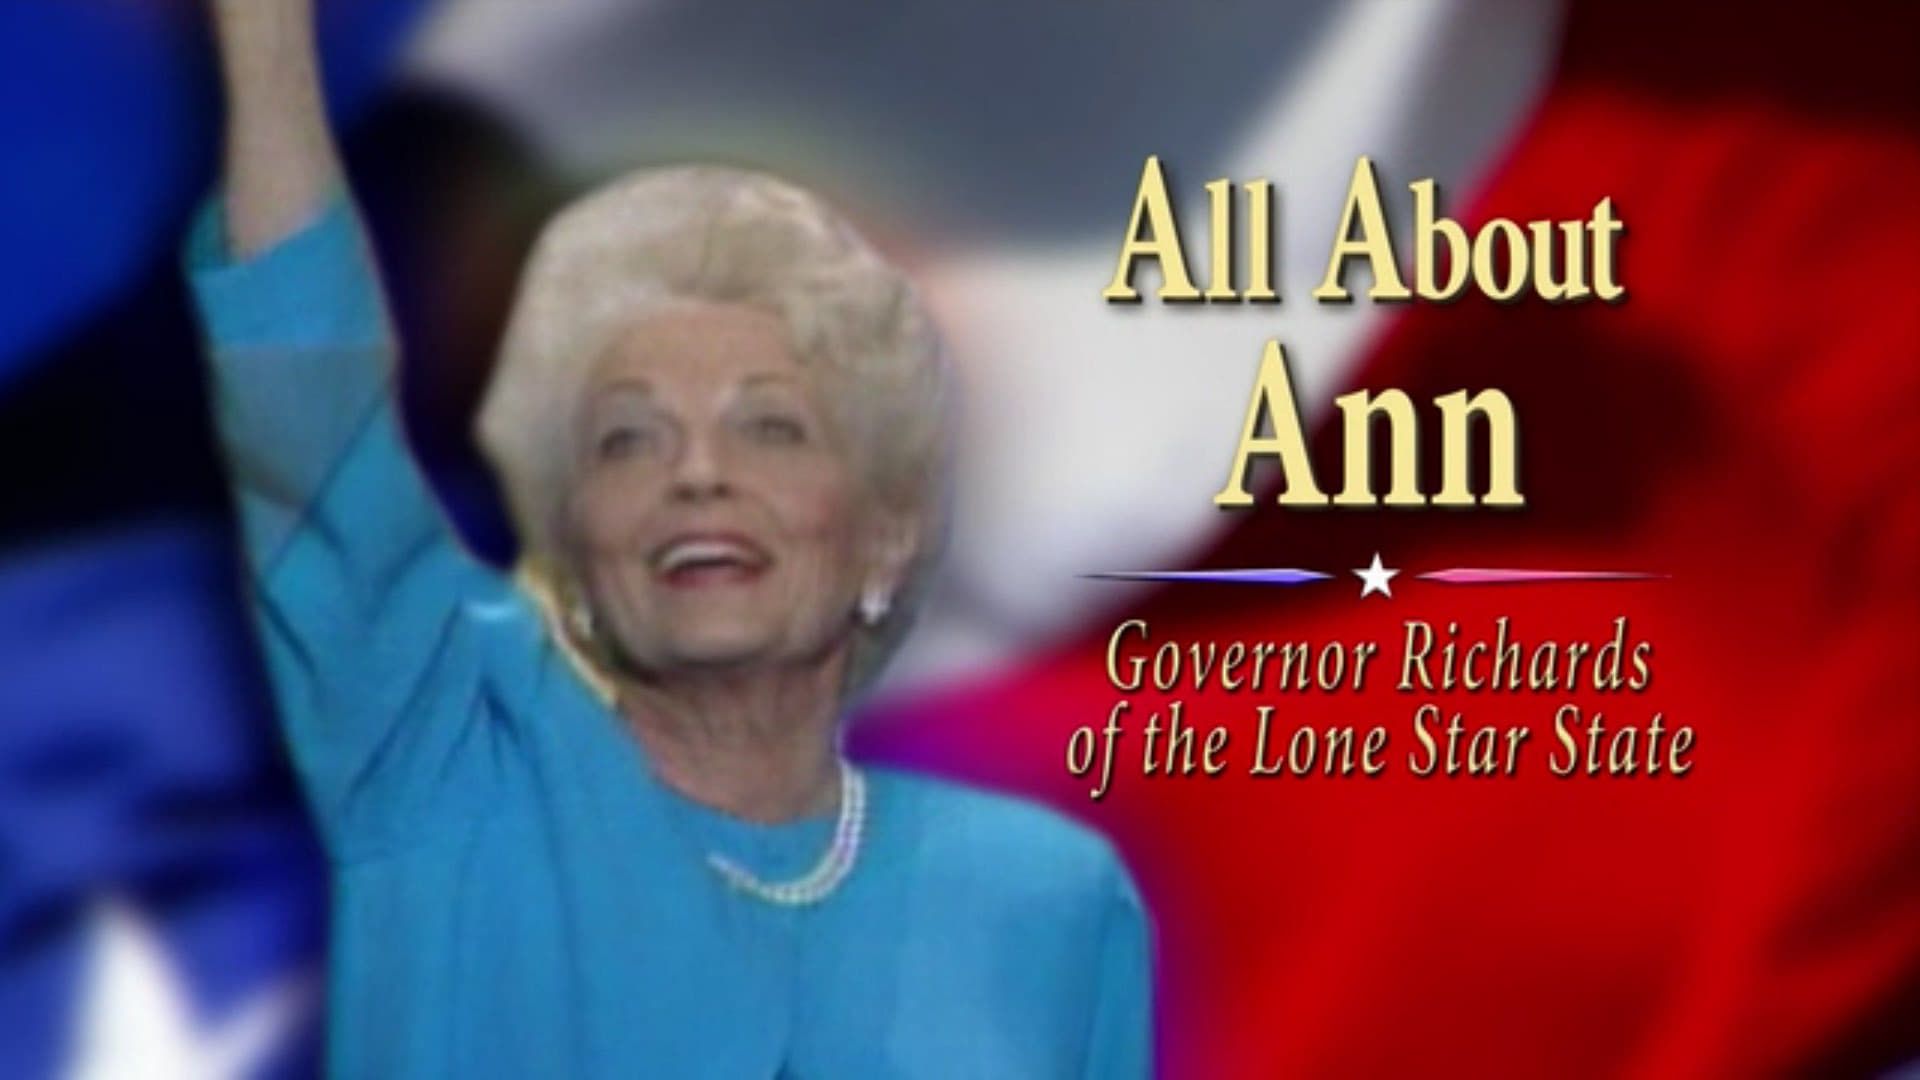 All About Ann: Governor Richards of the Lone Star State background